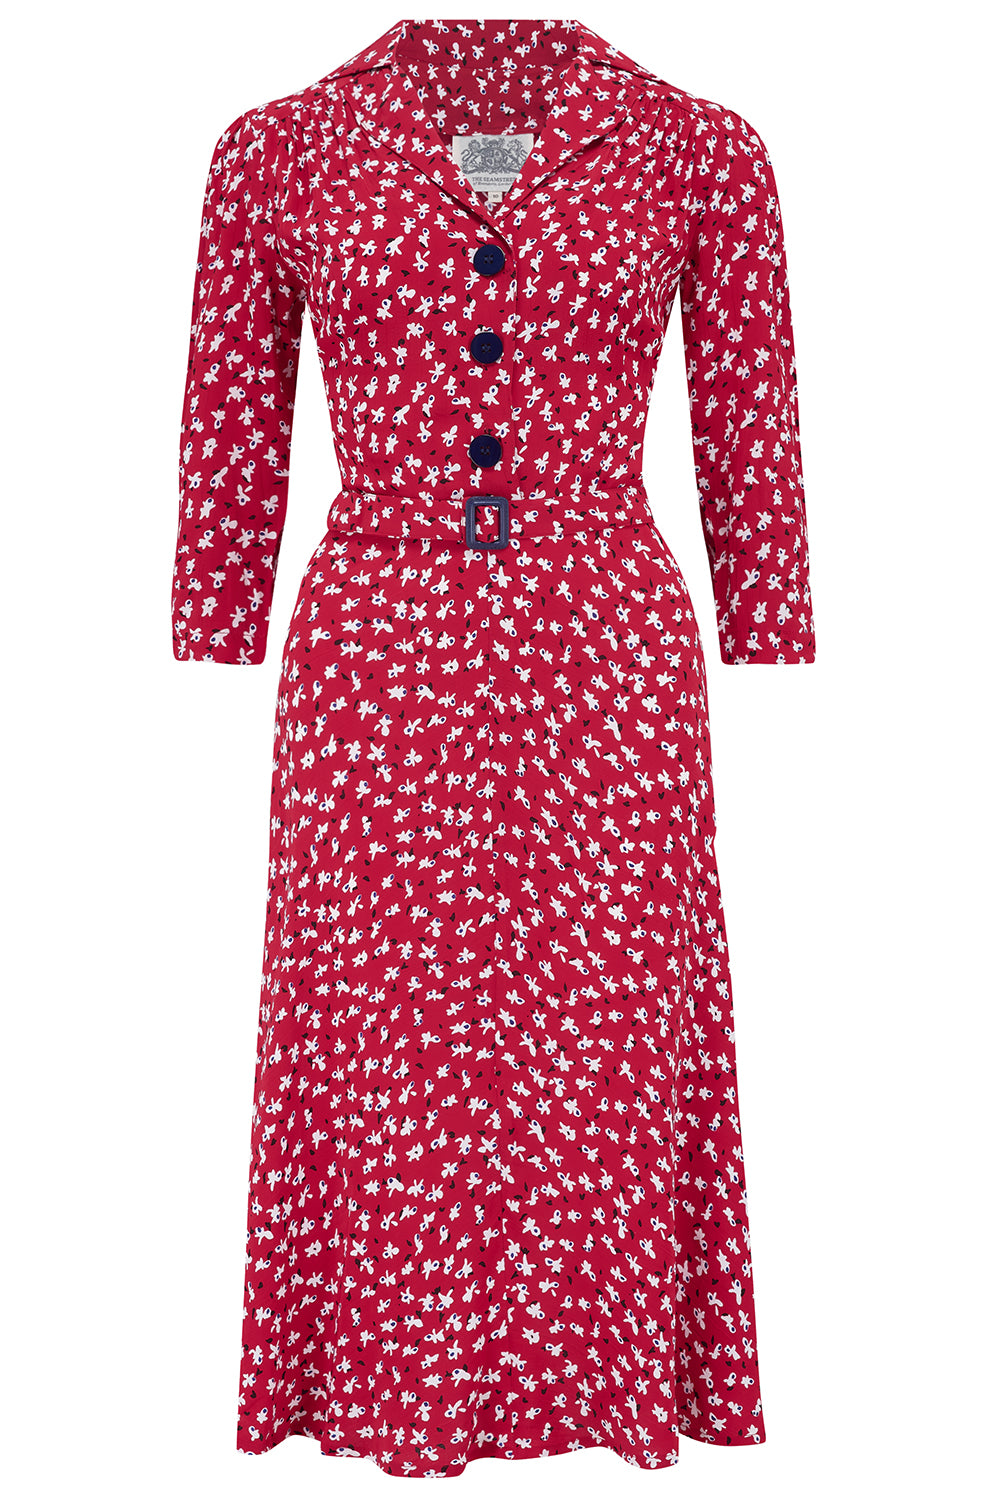 Lisa" Tea Dress with 3/4 Length Sleeves in Red Clover Print , Authentic 1940s Vintage Style - True and authentic vintage style clothing, inspired by the Classic styles of CC41 , WW2 and the fun 1950s RocknRoll era, for everyday wear plus events like Goodwood Revival, Twinwood Festival and Viva Las Vegas Rockabilly Weekend Rock n Romance The Seamstress Of Bloomsbury